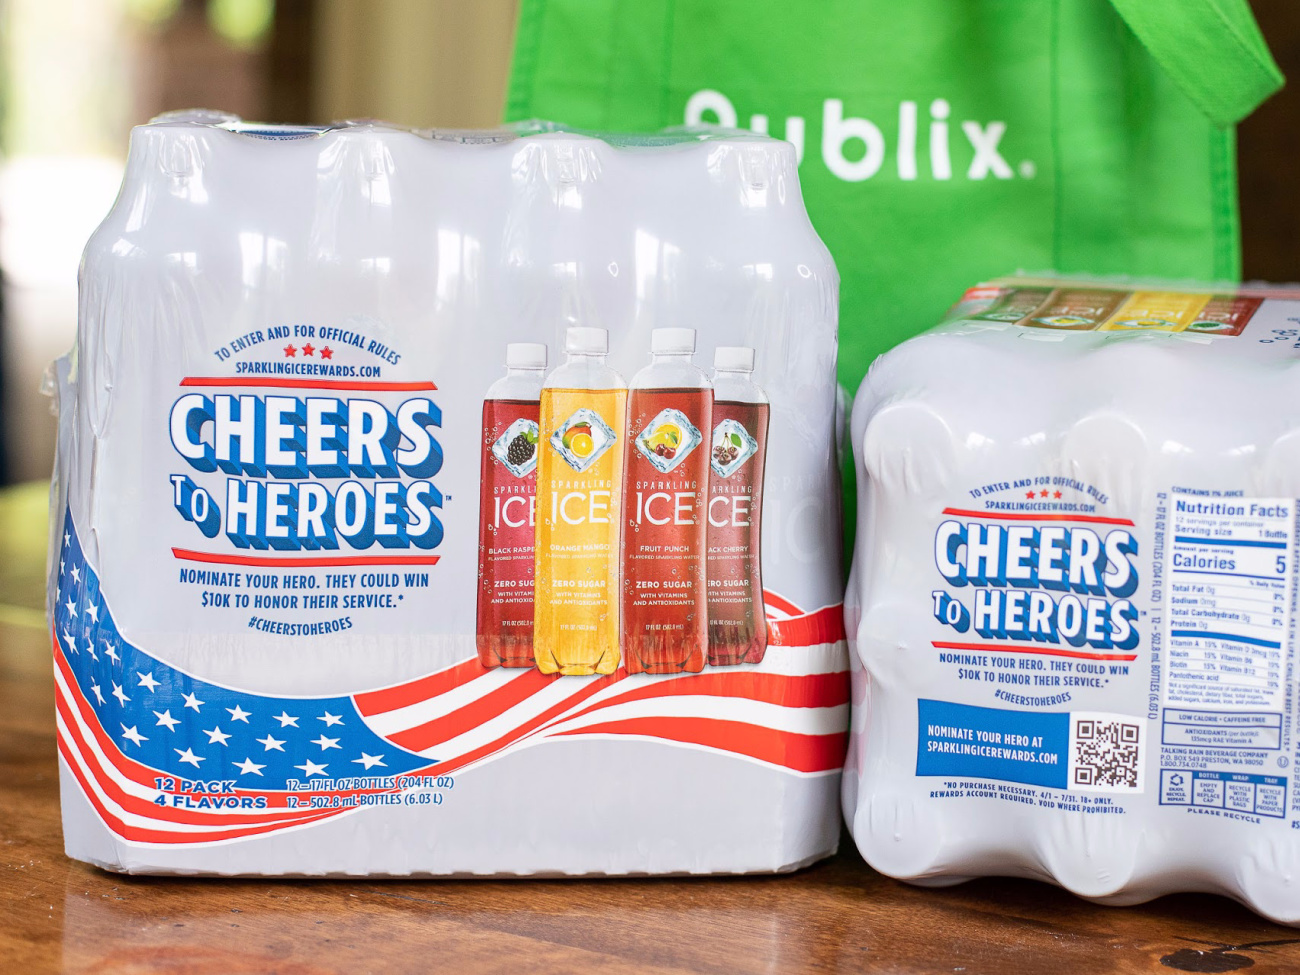 Time To Say Cheers To Your Heroes AND Save On Sparkling Ice At Publix